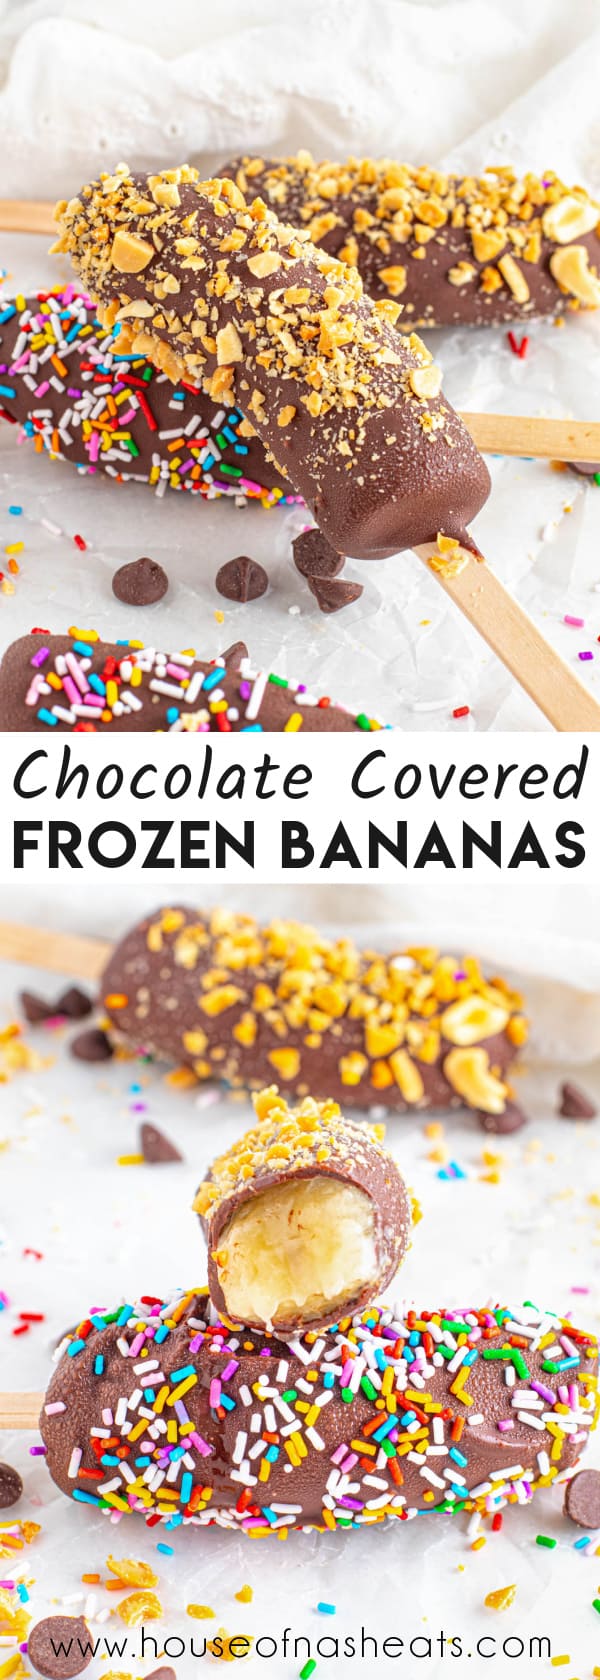 A collage of images of chocolate covered frozen bananas with text overlay.